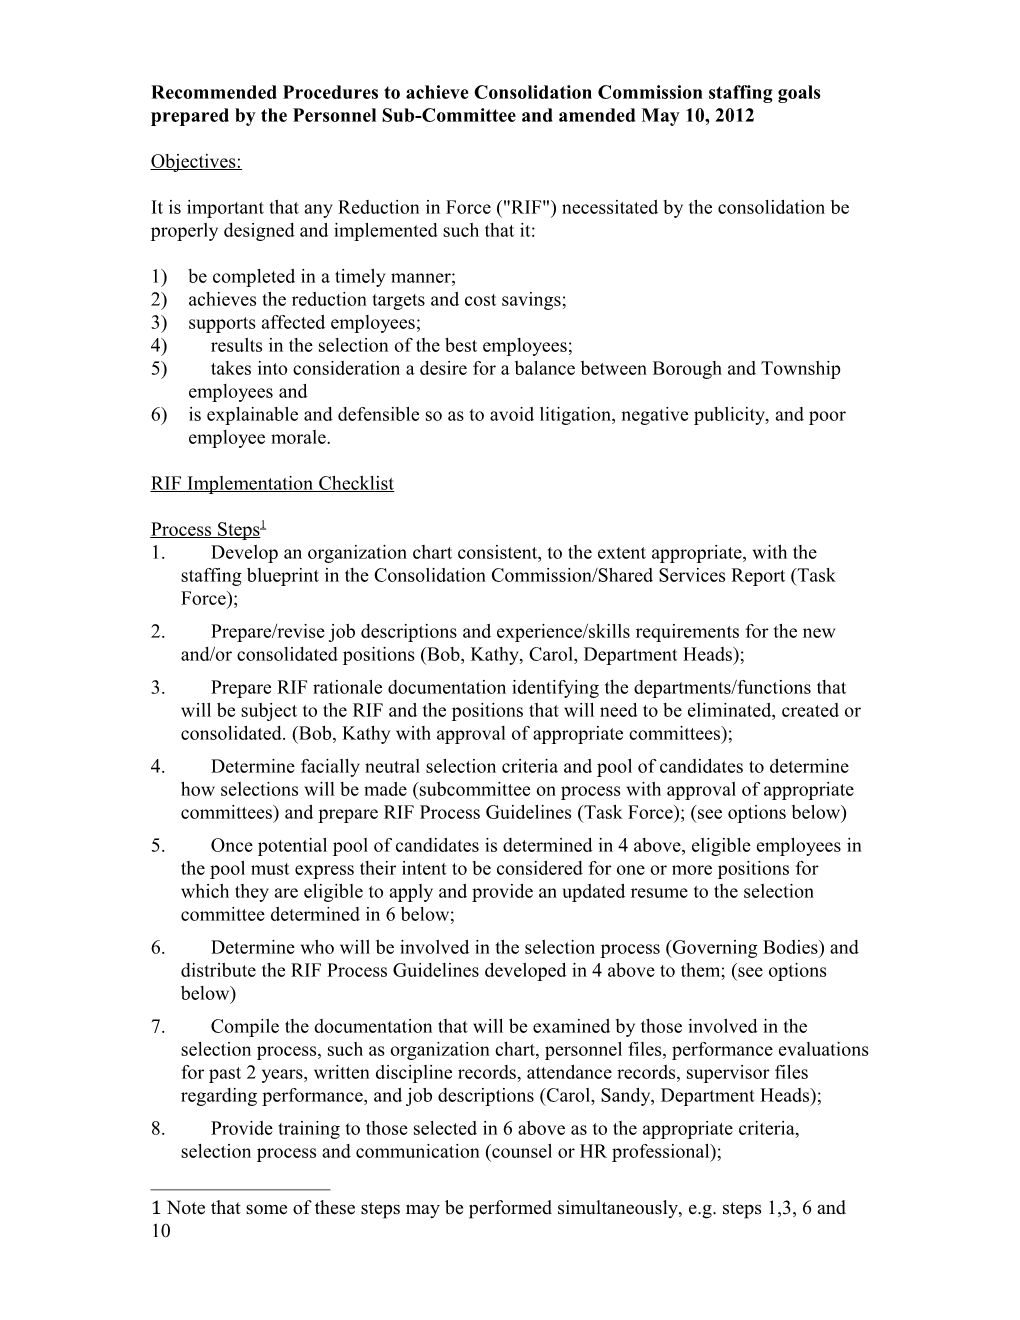 Proposed Procedures to Achieve Consolidation Commission Staffing Goals Prepared by The